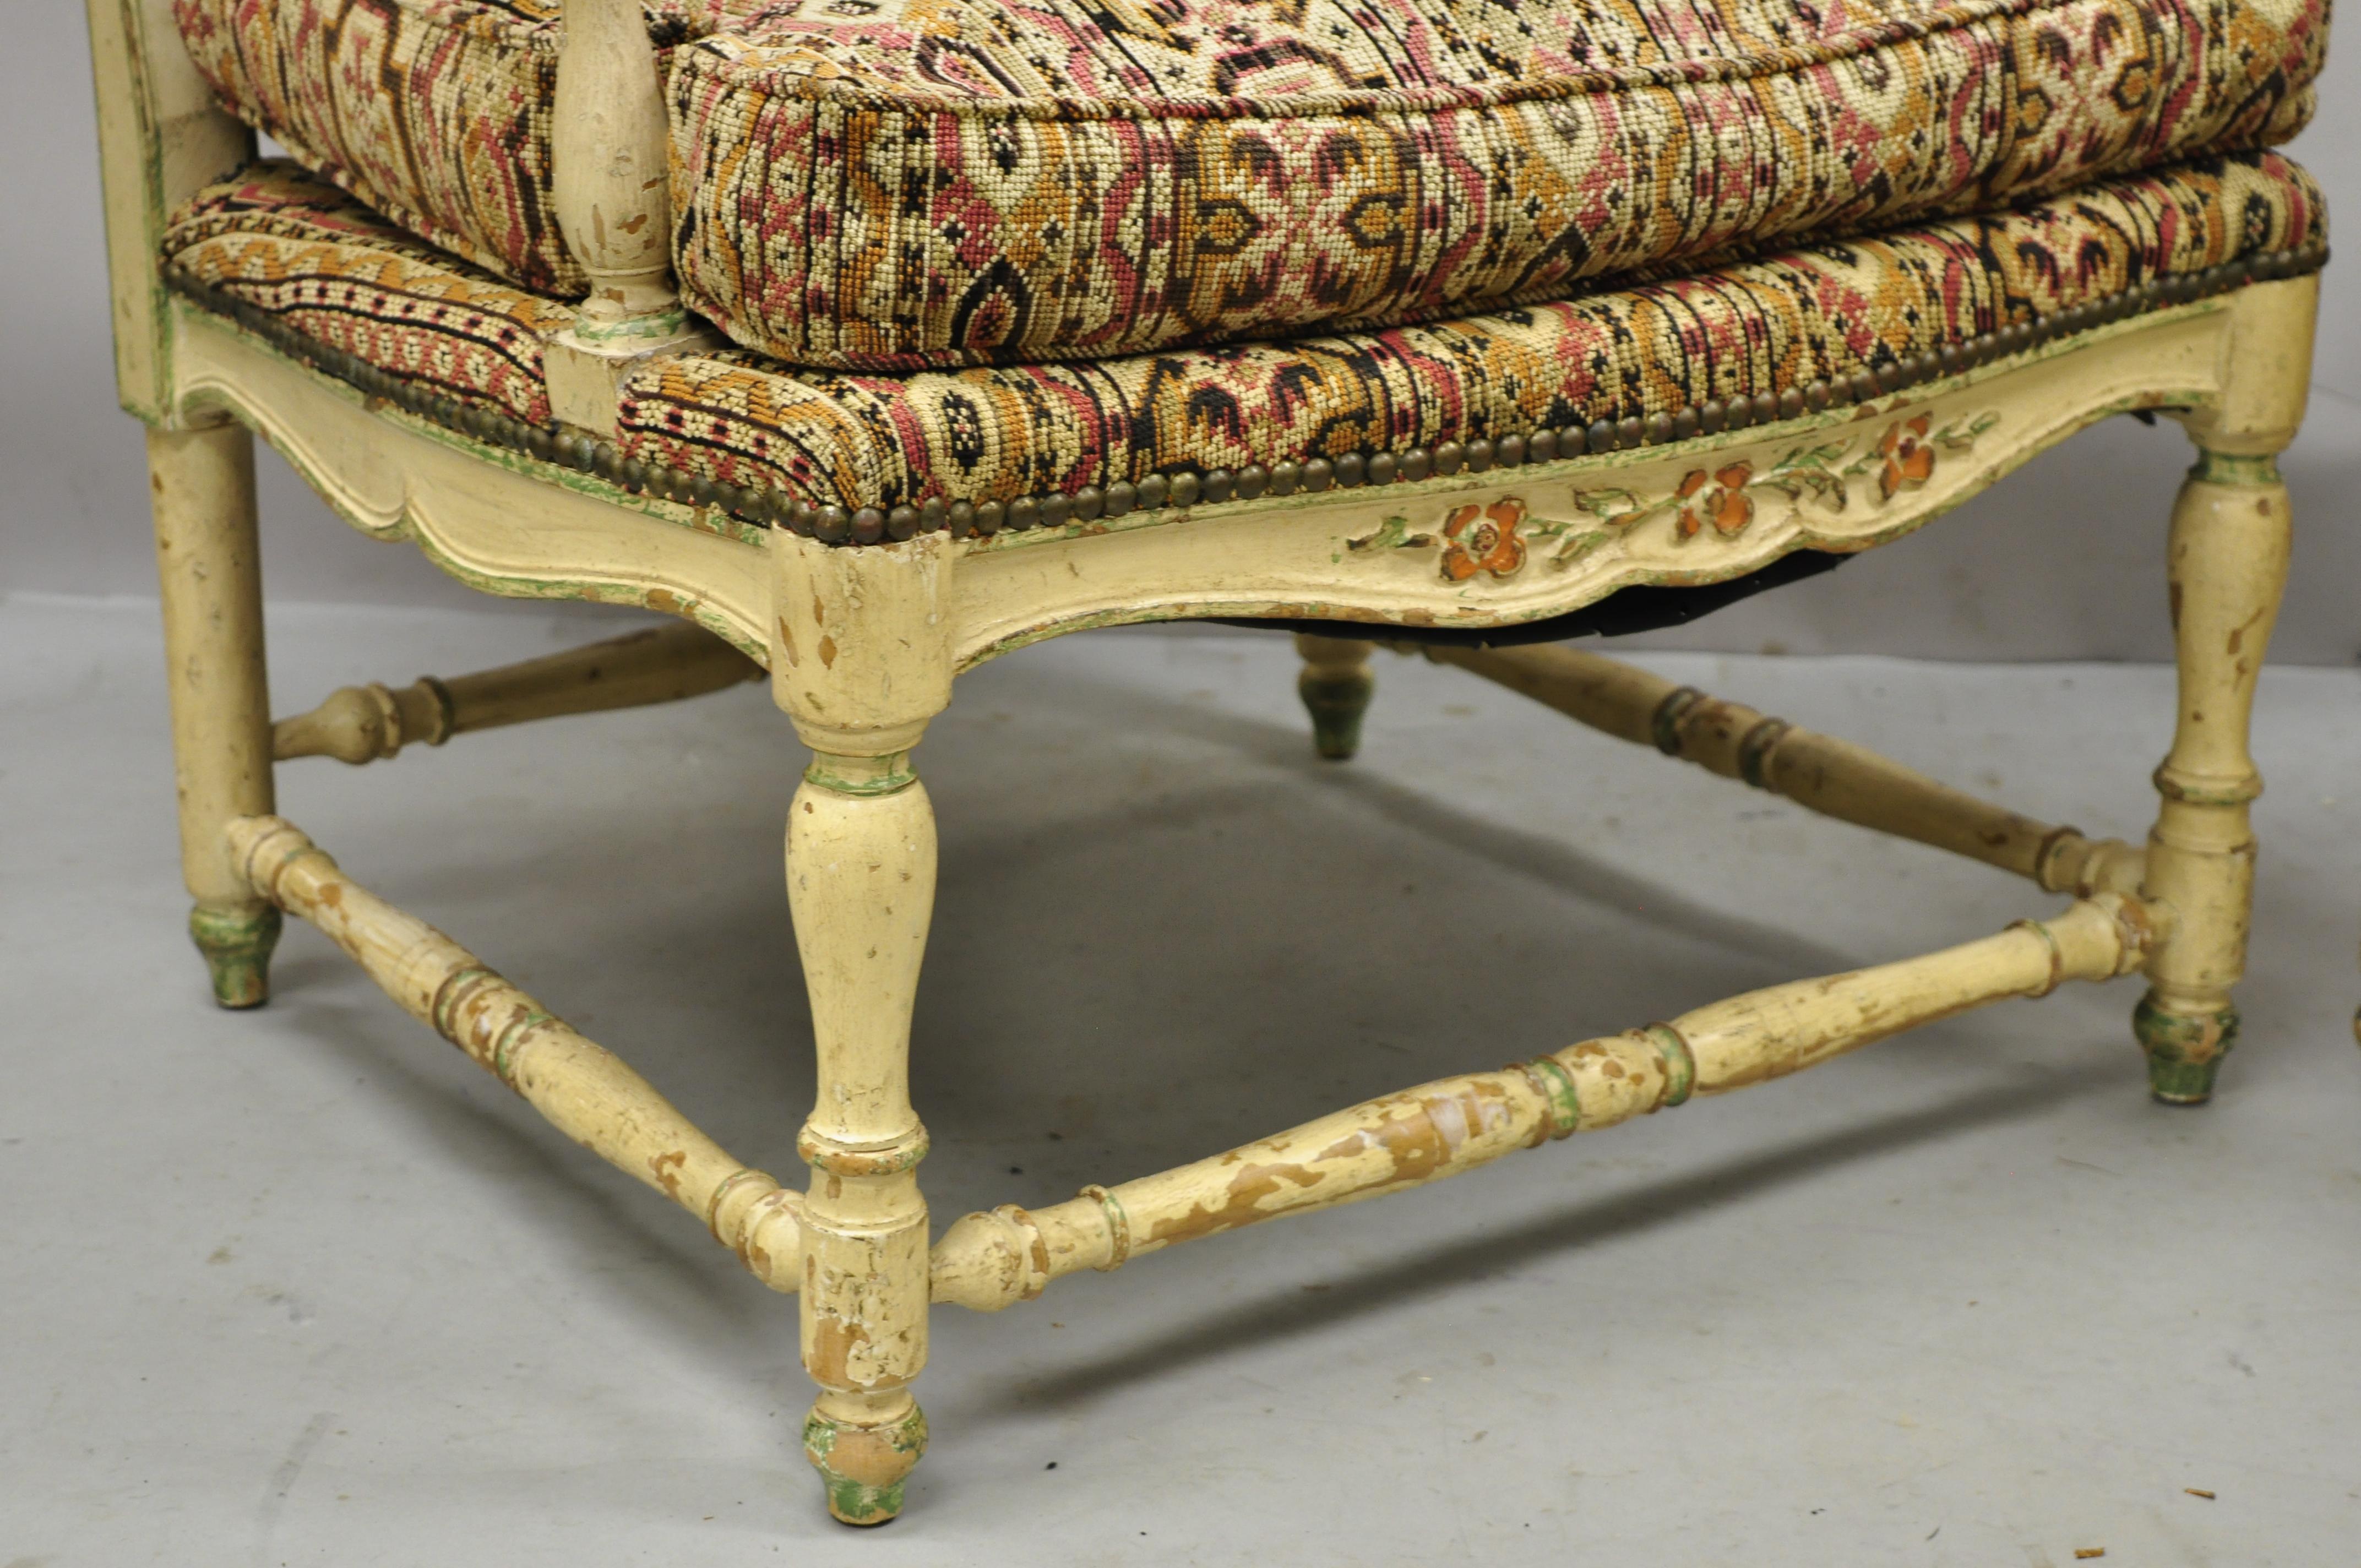 Vintage French Provincial Cream Distress Painted Lounge Arm Chairs and Ottoman For Sale 1